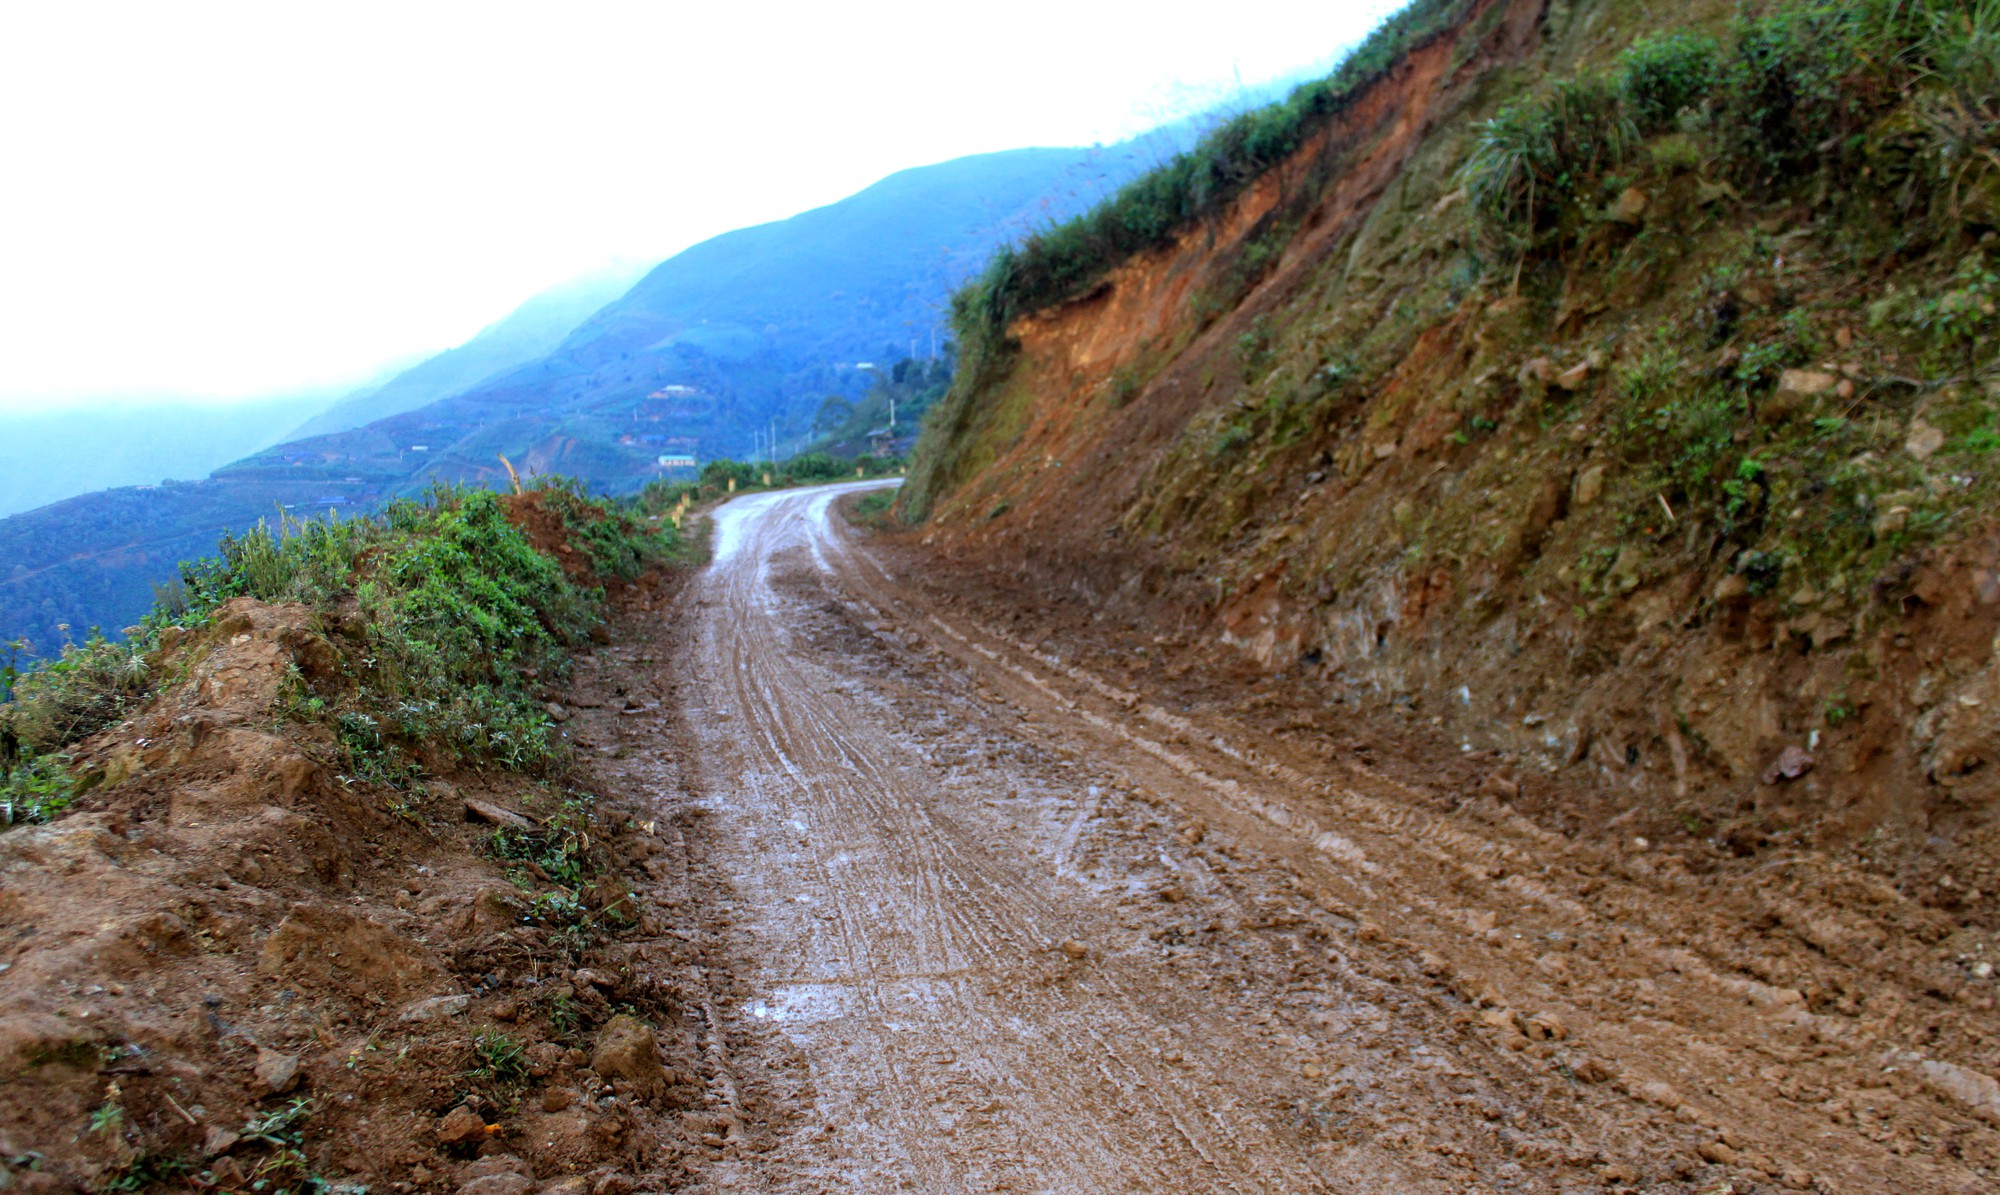 The muddy road the backpackers drove through on their ‘cloud-hunting conquest.’ Photo: Thu Hue